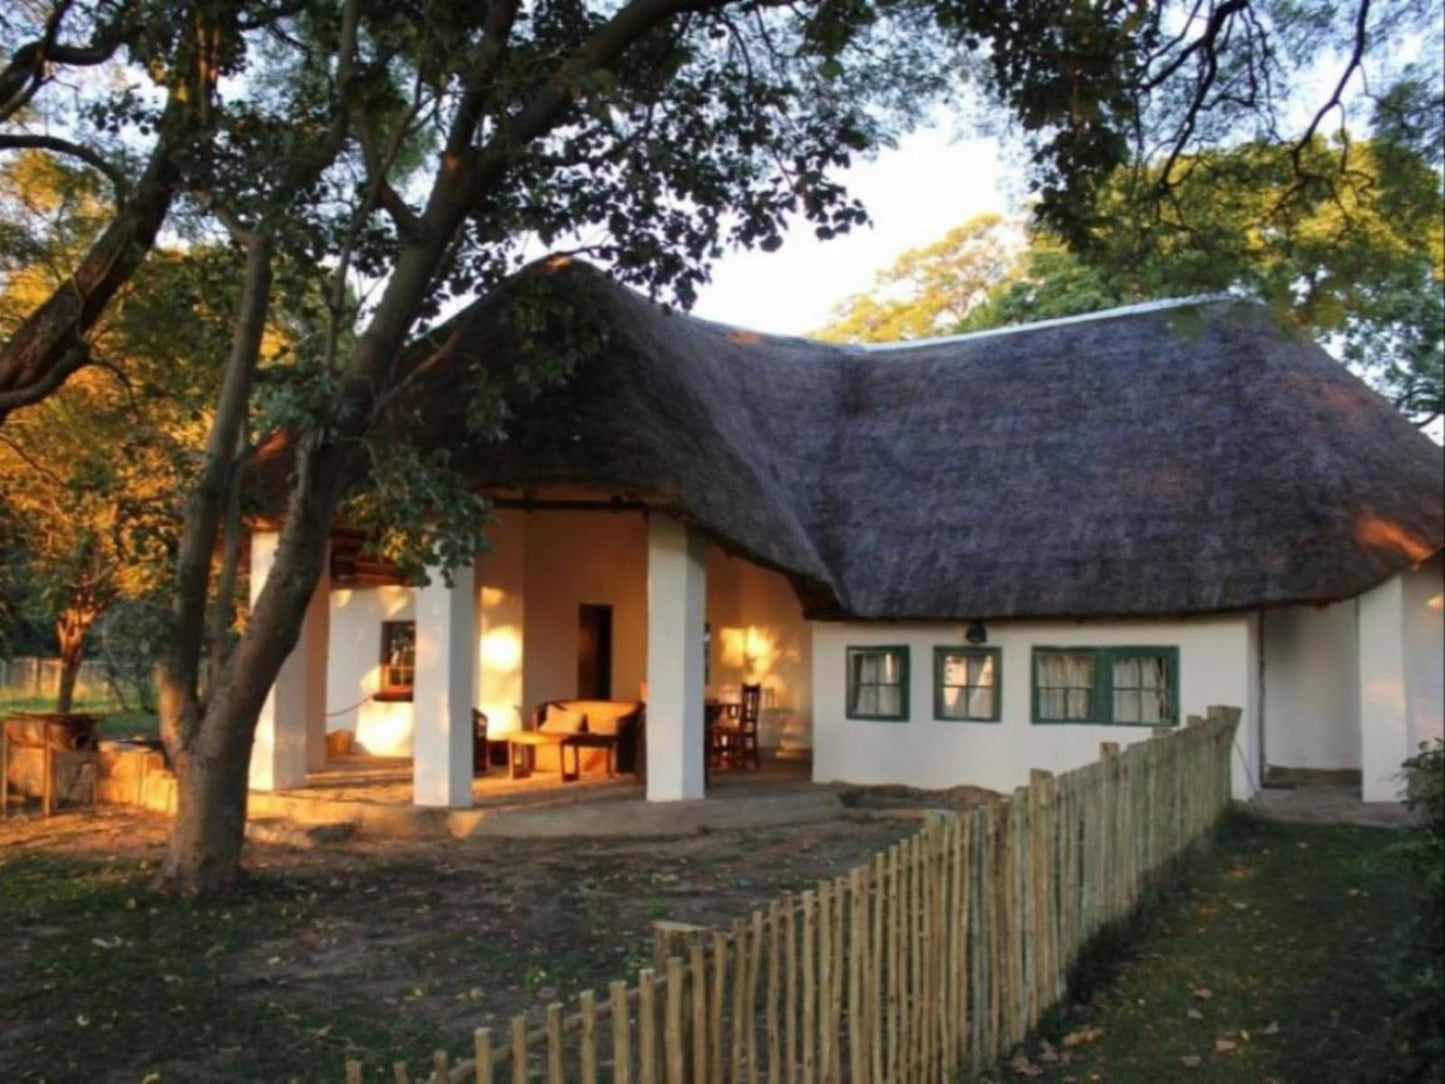 Waterberg Cottages Vaalwater Limpopo Province South Africa Building, Architecture, House